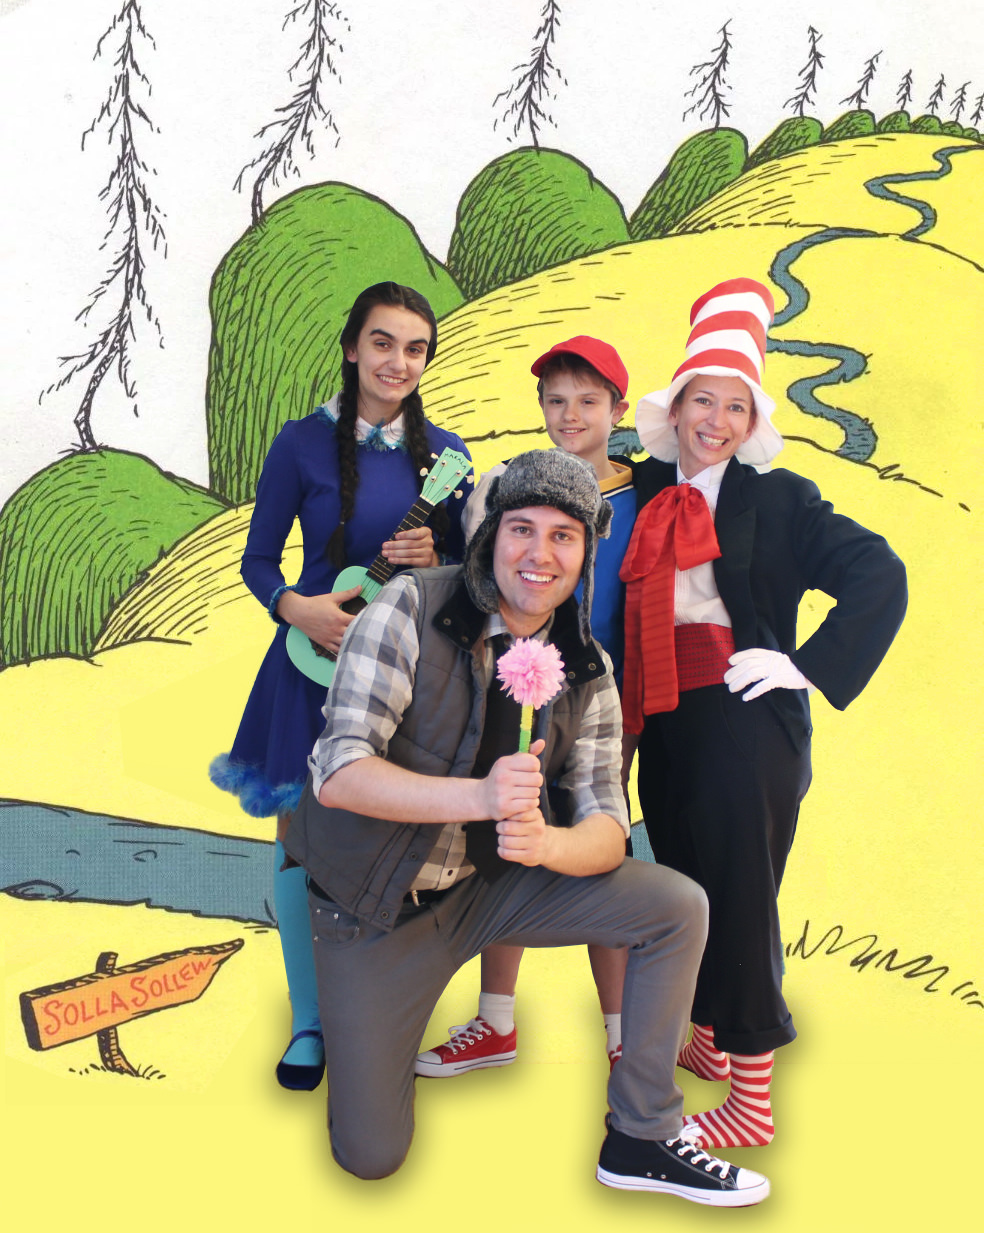 Your cast of Seussical includes (Pictured Left to Right): Emily Goulette as Gertrude McFuzz; Adam P. Blais as Horton the Elephant; Andrew Lyndaker as Jojo; and Rebecca Singer as The Cat in the Hat! 1